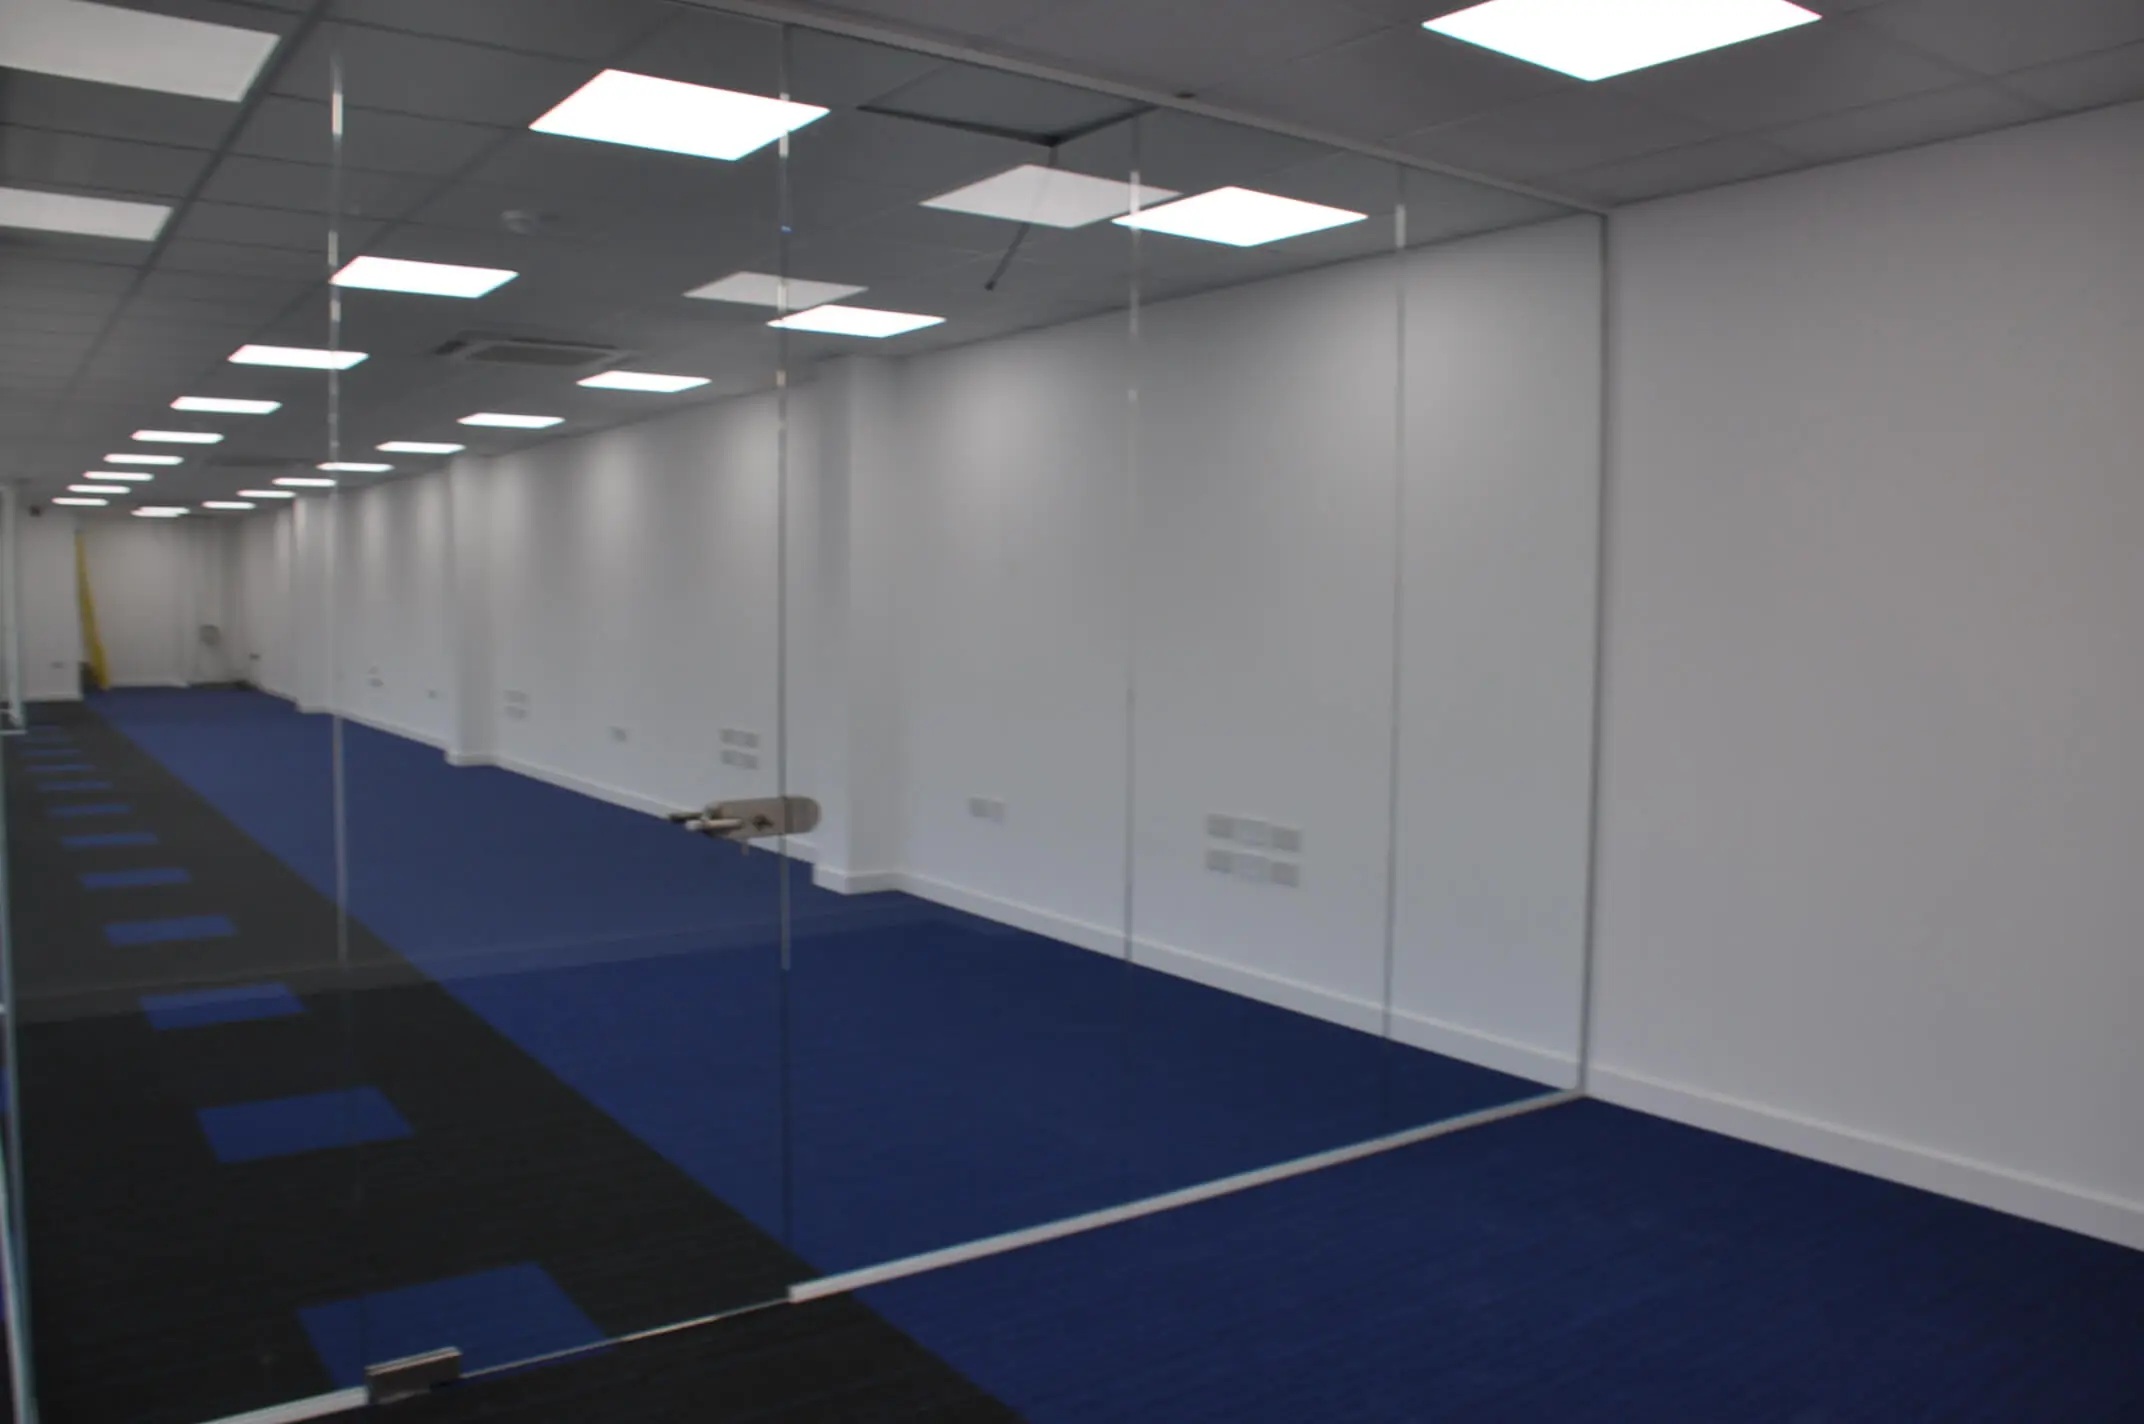 Frameless glass partitioning in large office space